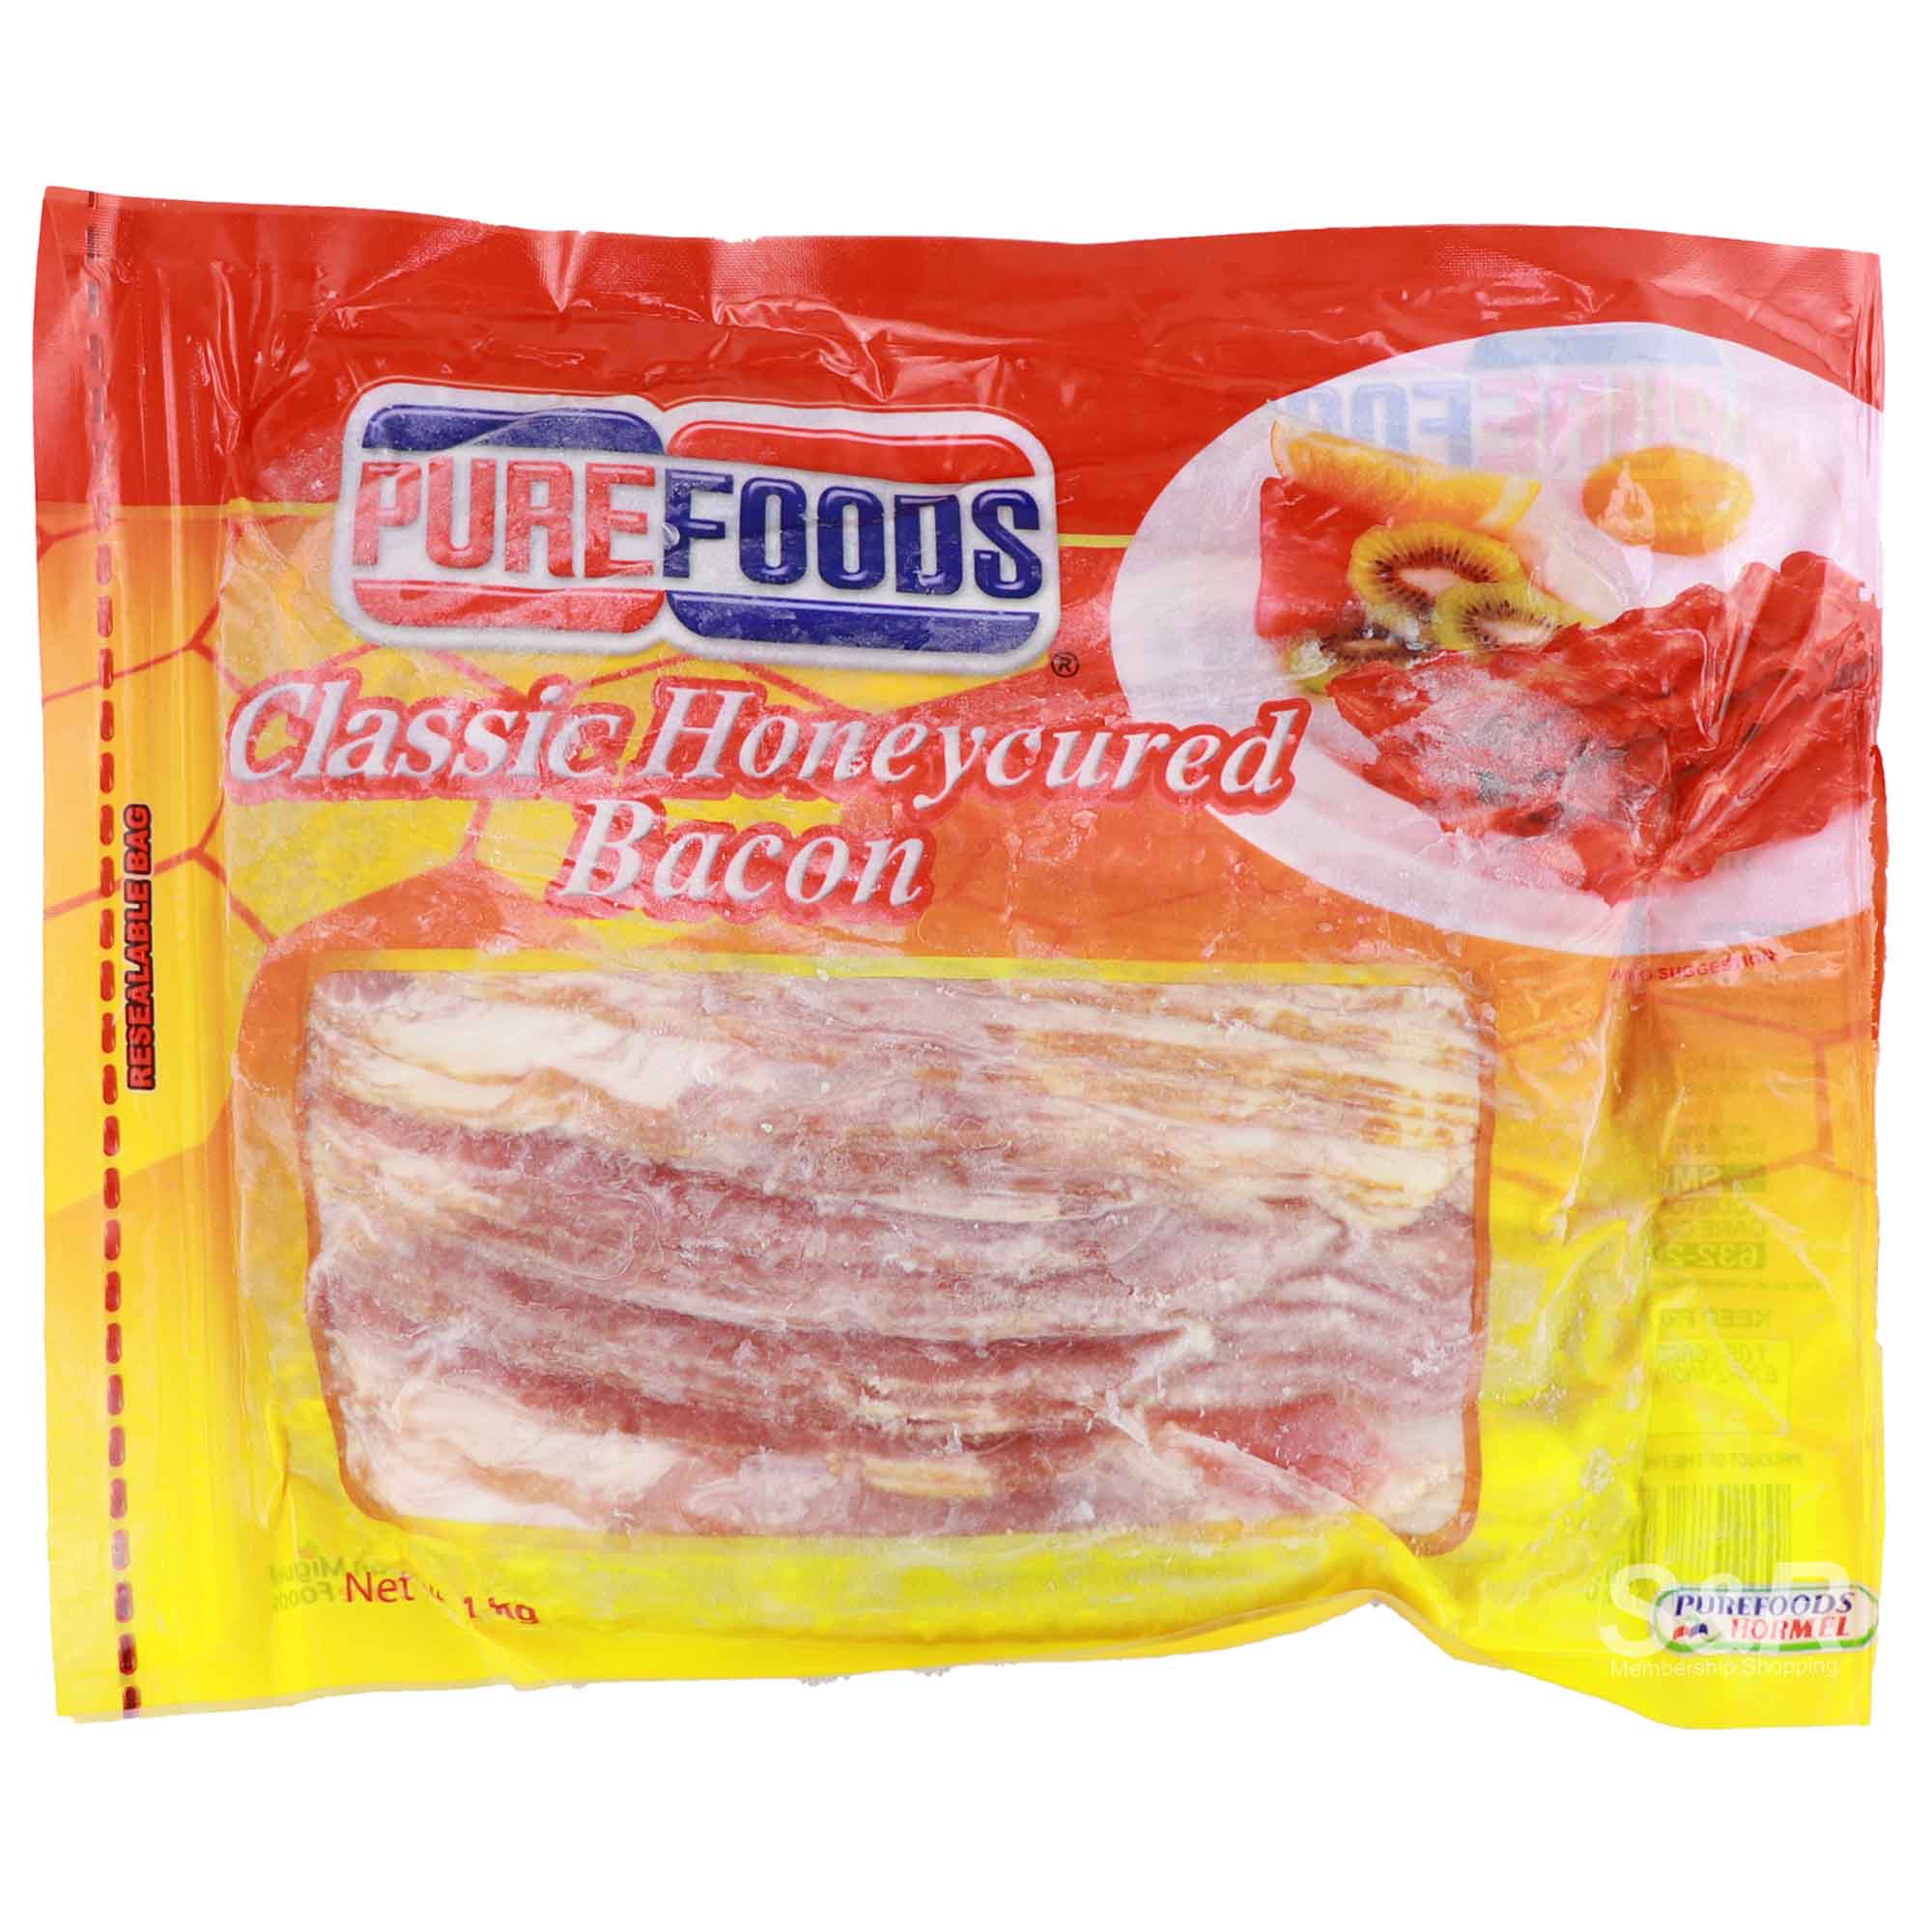 Purefoods Classic Honeycured Bacon 1kg